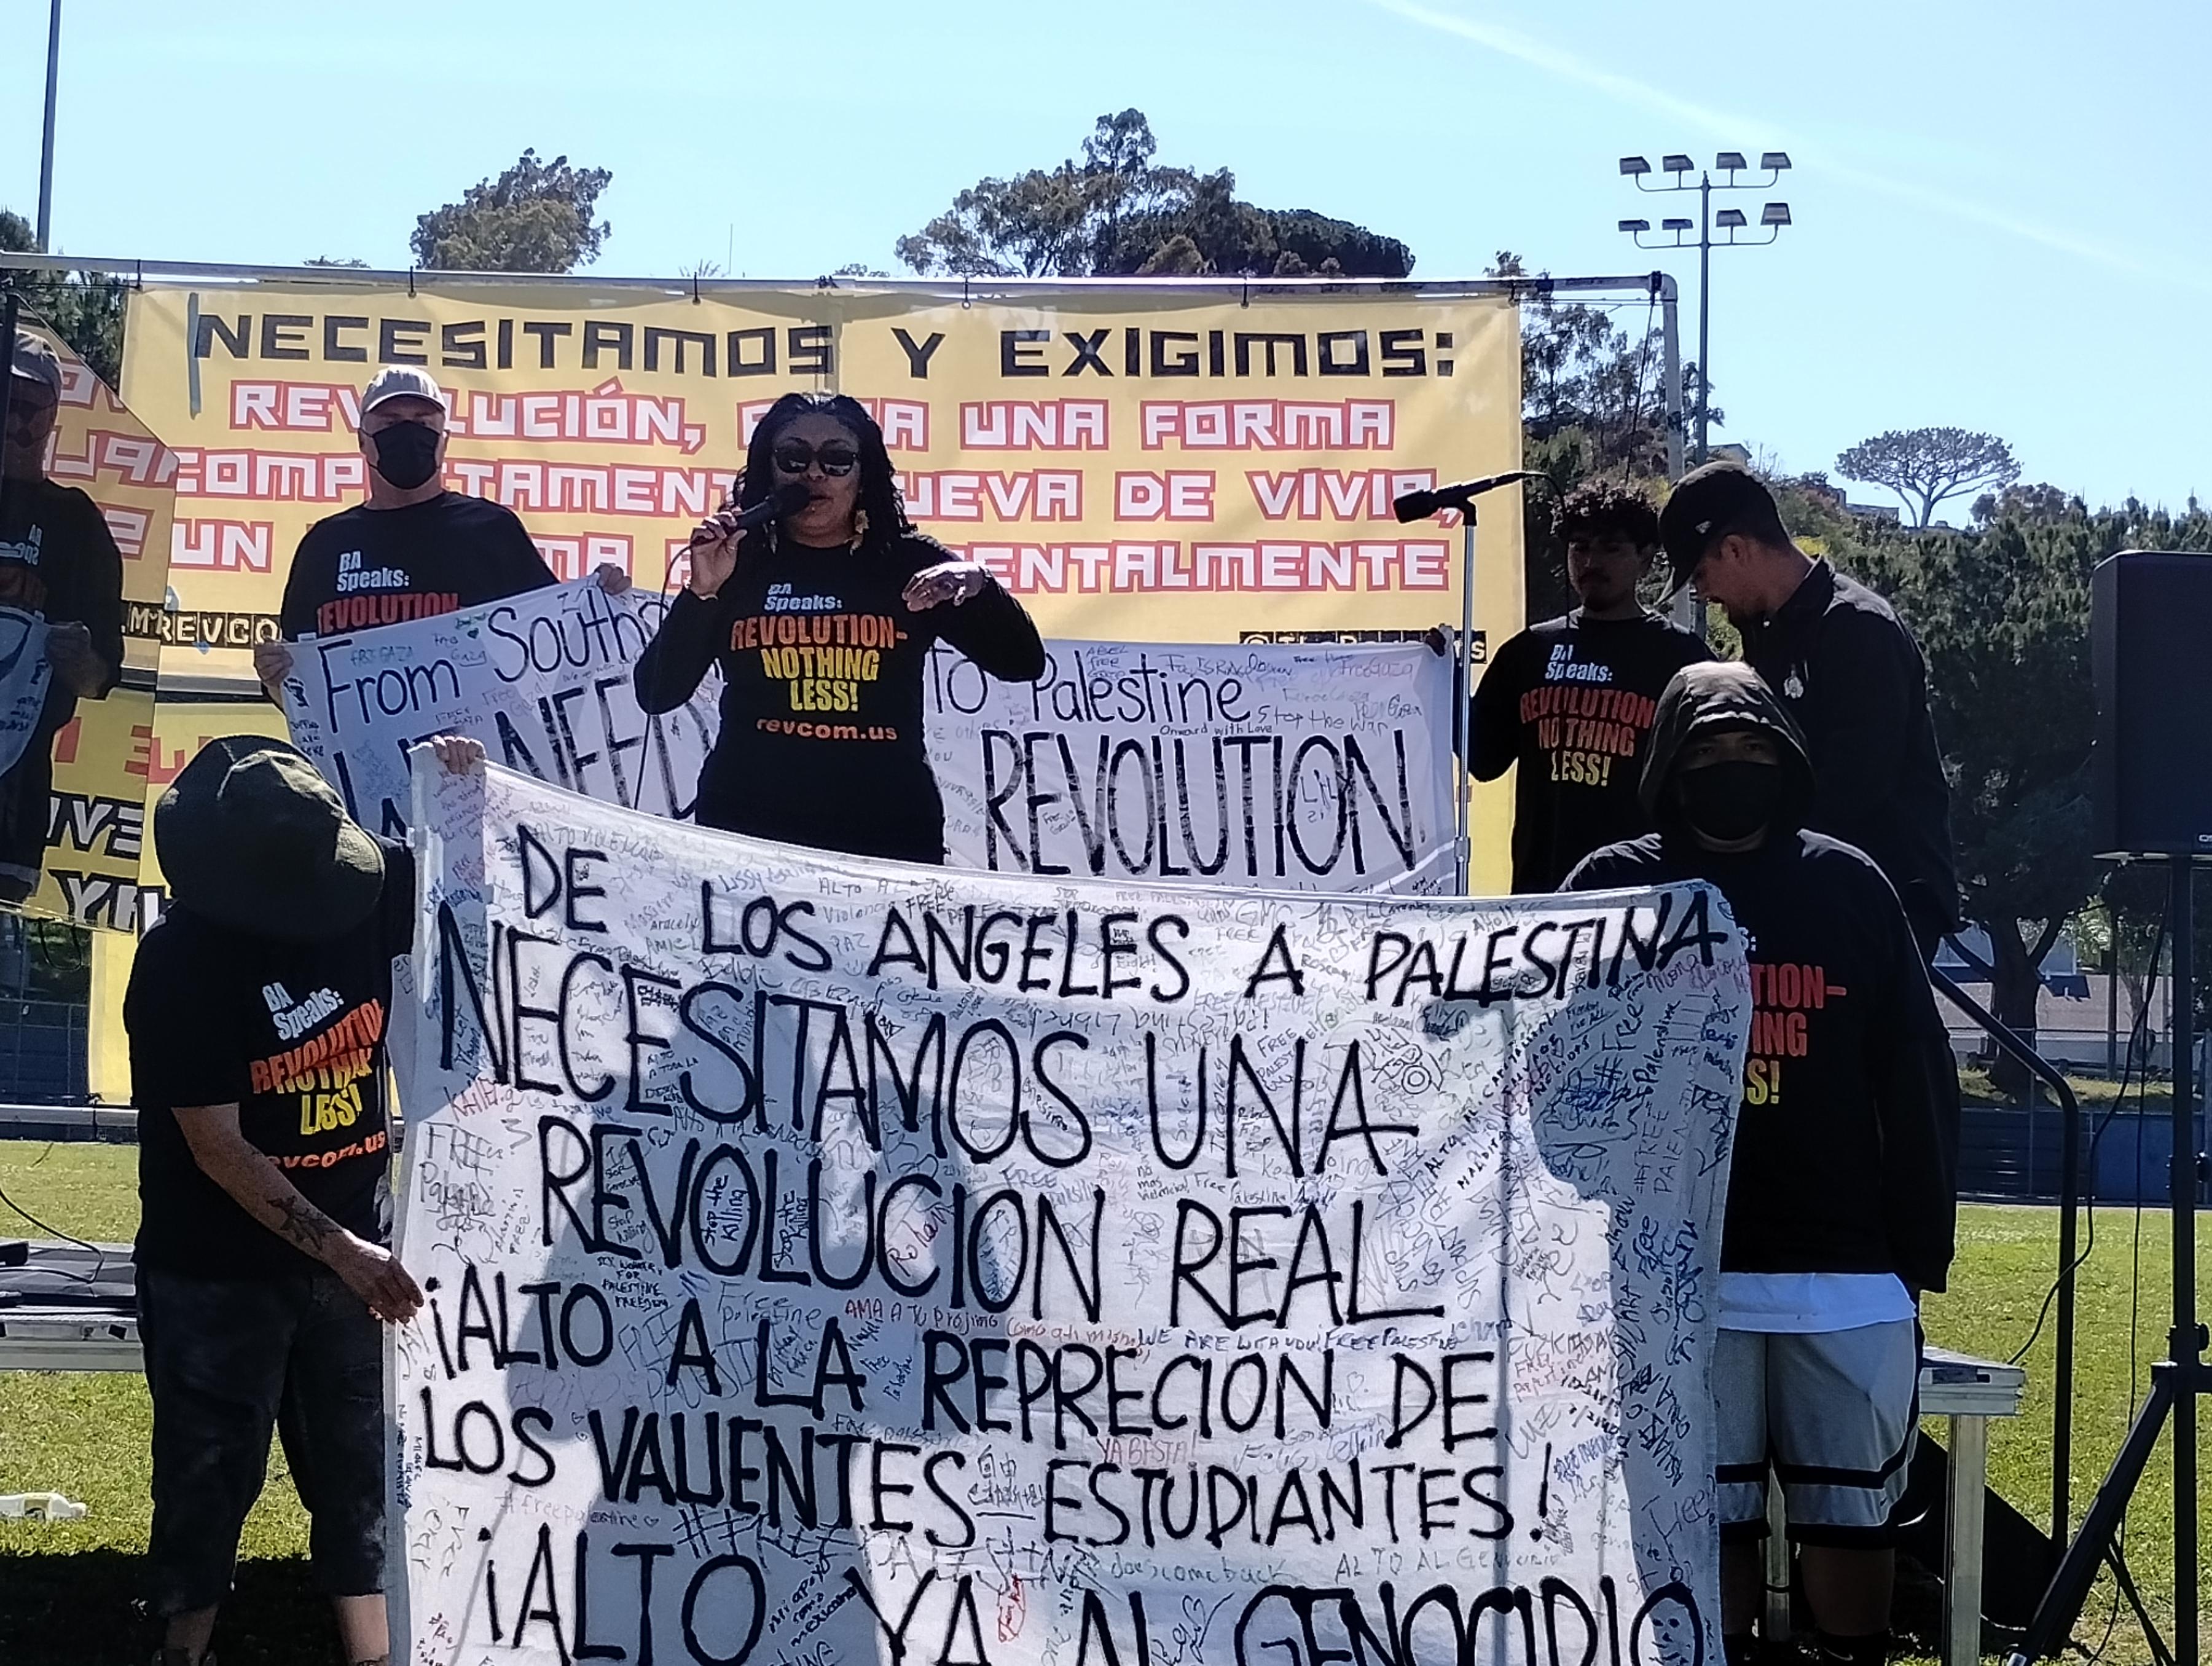 Member of the Revcom Corps speaks at Revolutionary Internationalist May Day in Los Angeles